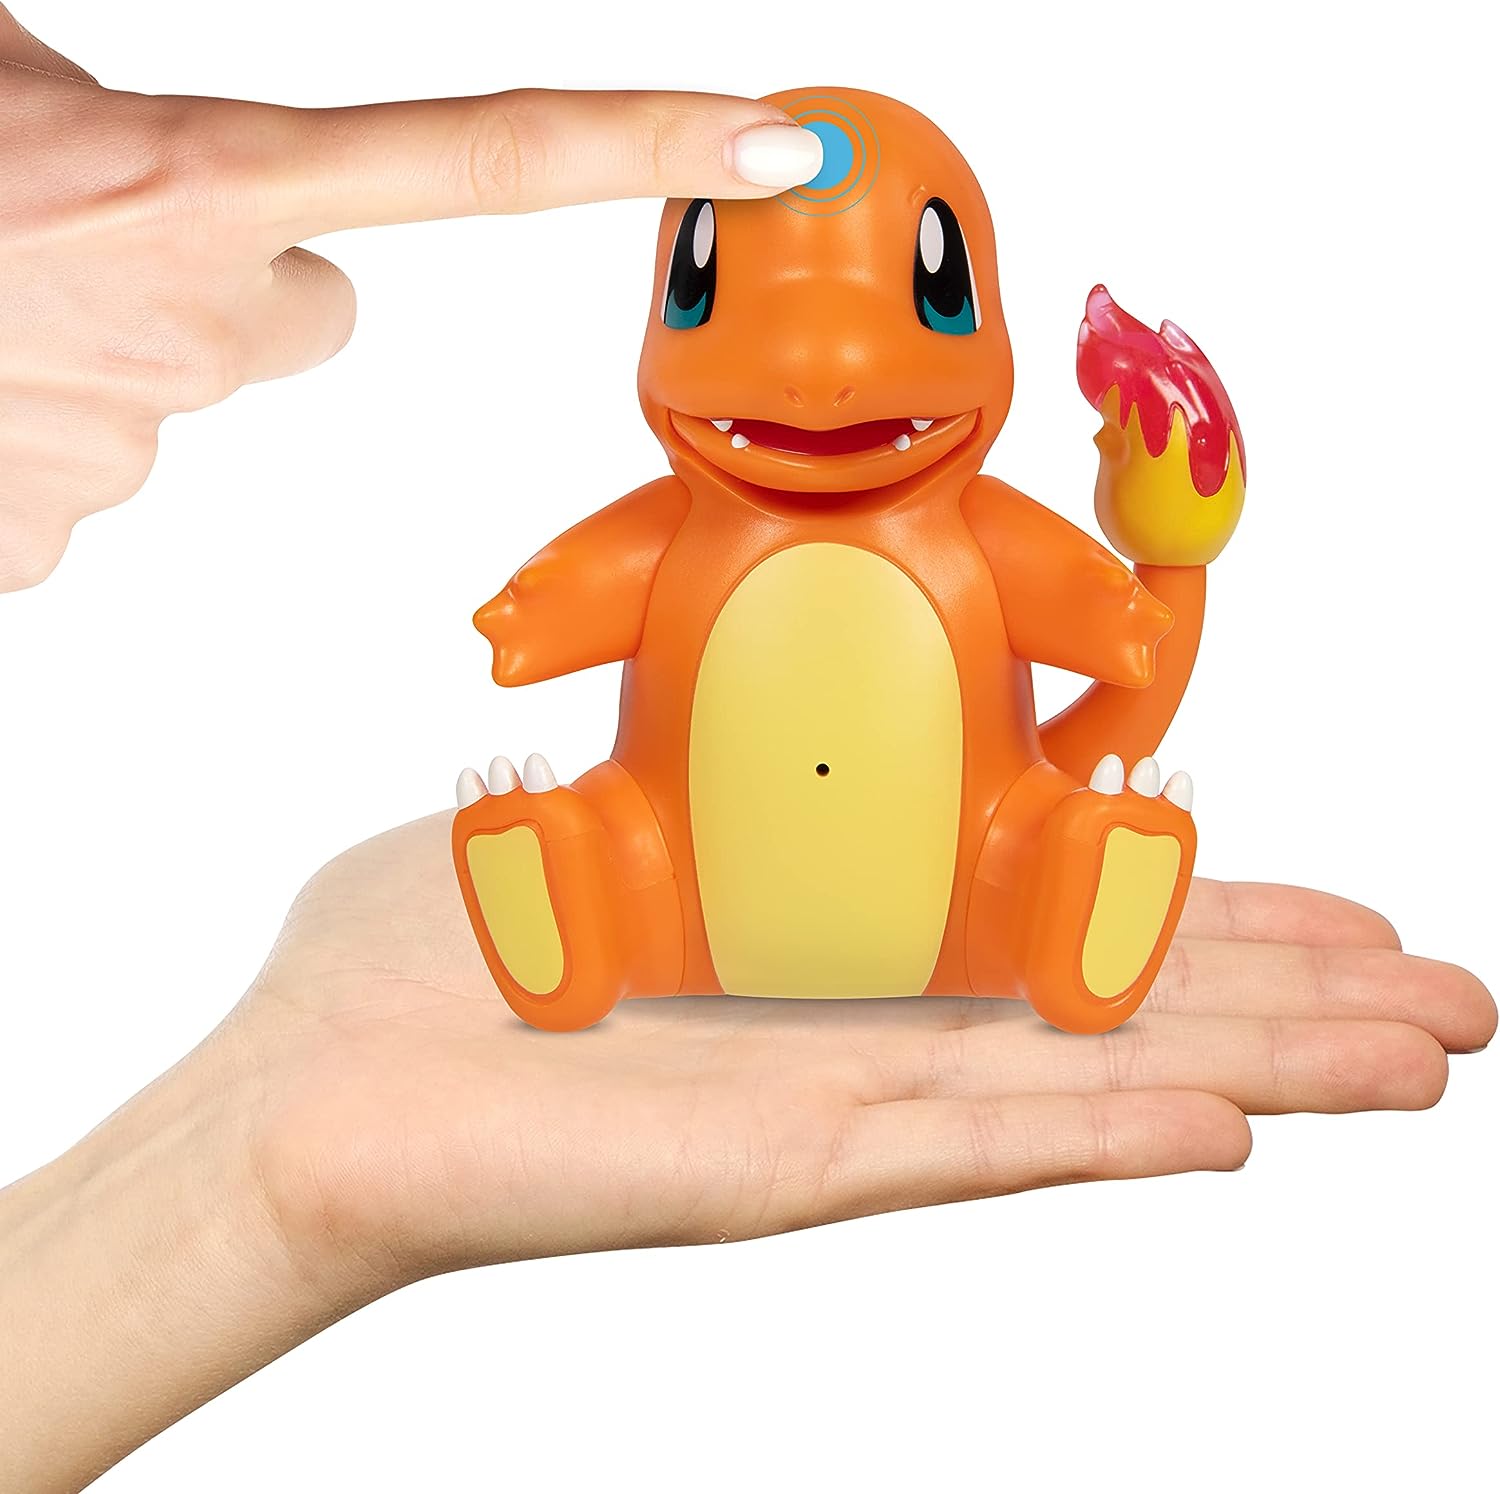 Pokémon Electronic & Interactive My Partner Charmander- Reacts to Touch & Sound, Over 50 Different Interactions with Movement and Sound - Dances, Moves & Speaks - Gotta Catch "˜Em All